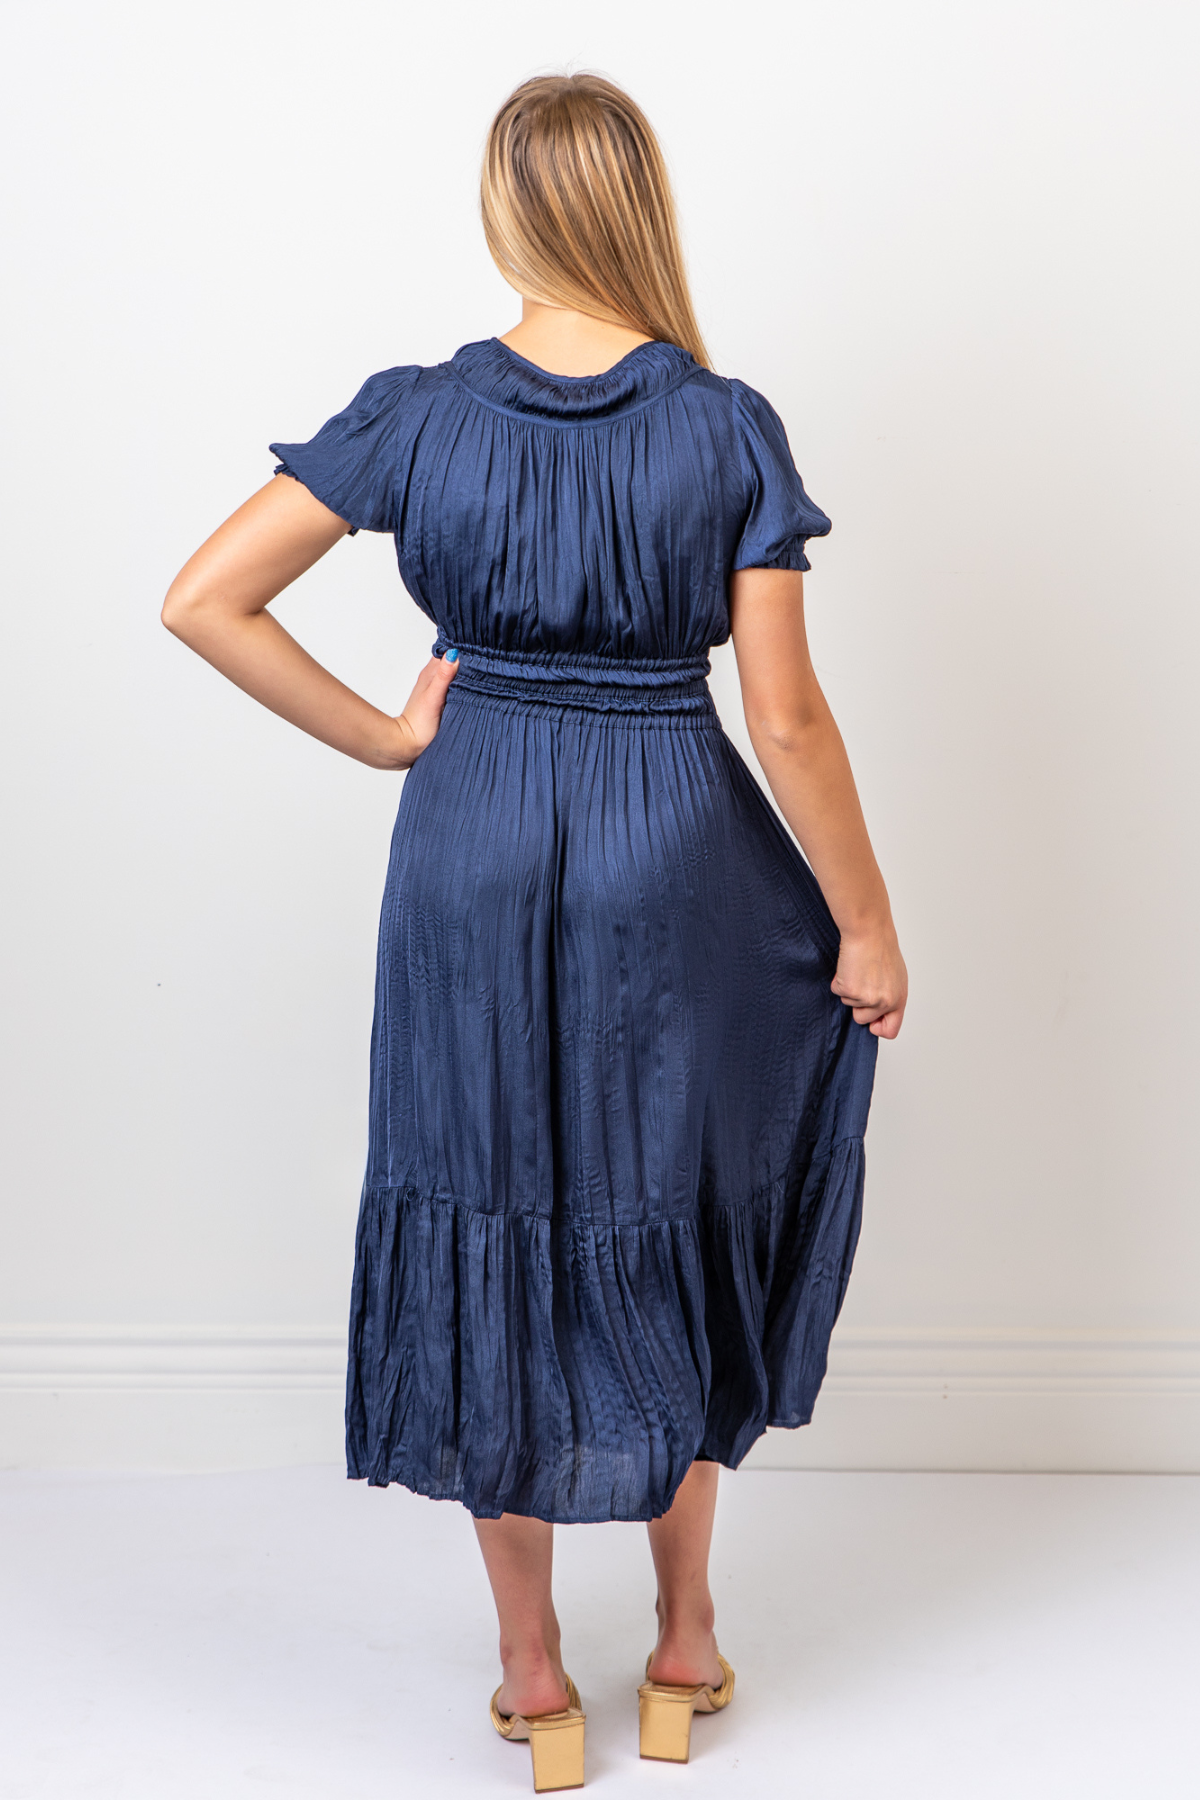 Current Air: The Cicely Dress